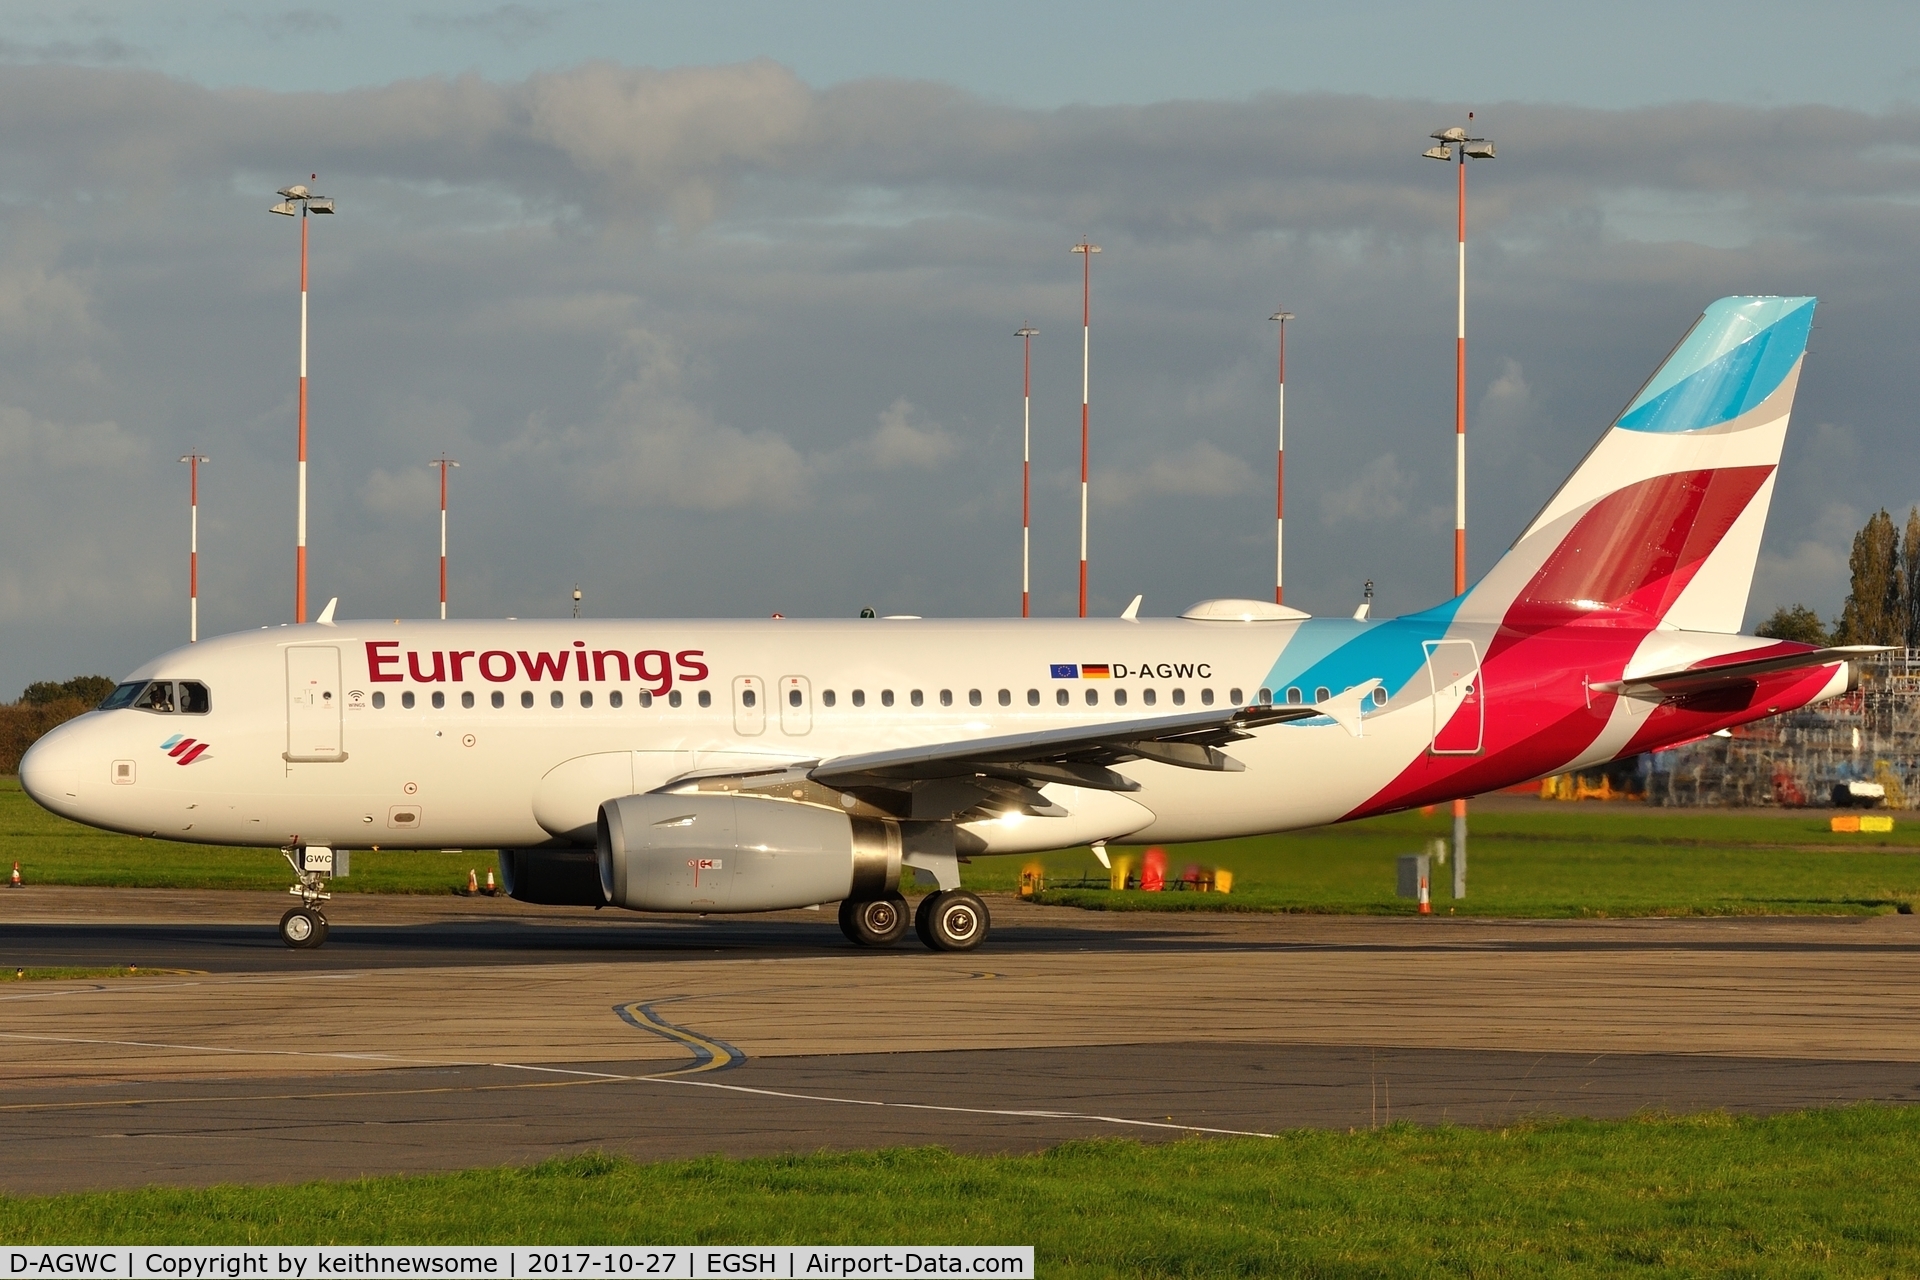 D-AGWC, 2006 Airbus A319-132 C/N 2976, Leaving Norwich with Eurowings colour scheme.